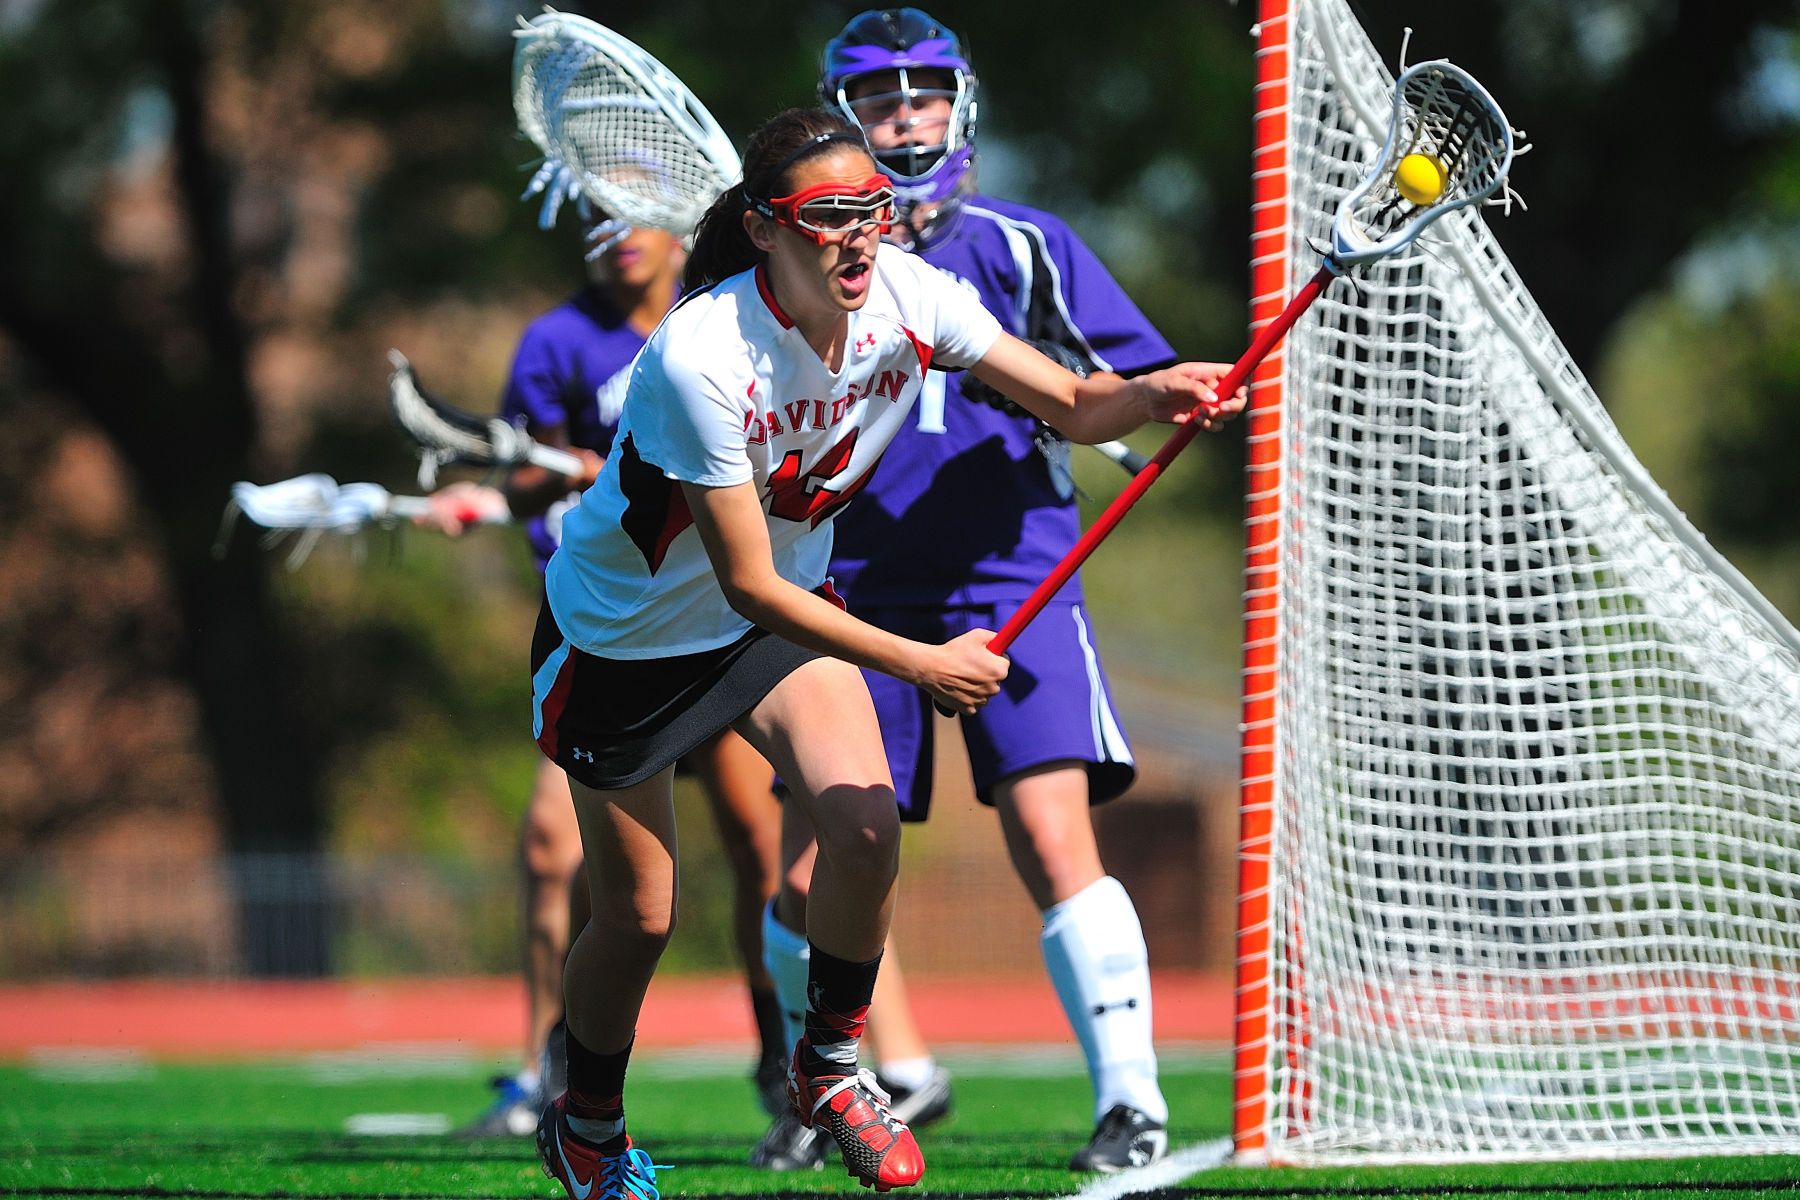 NCAA LACROSSE:  APR 16 High Point at Davidson